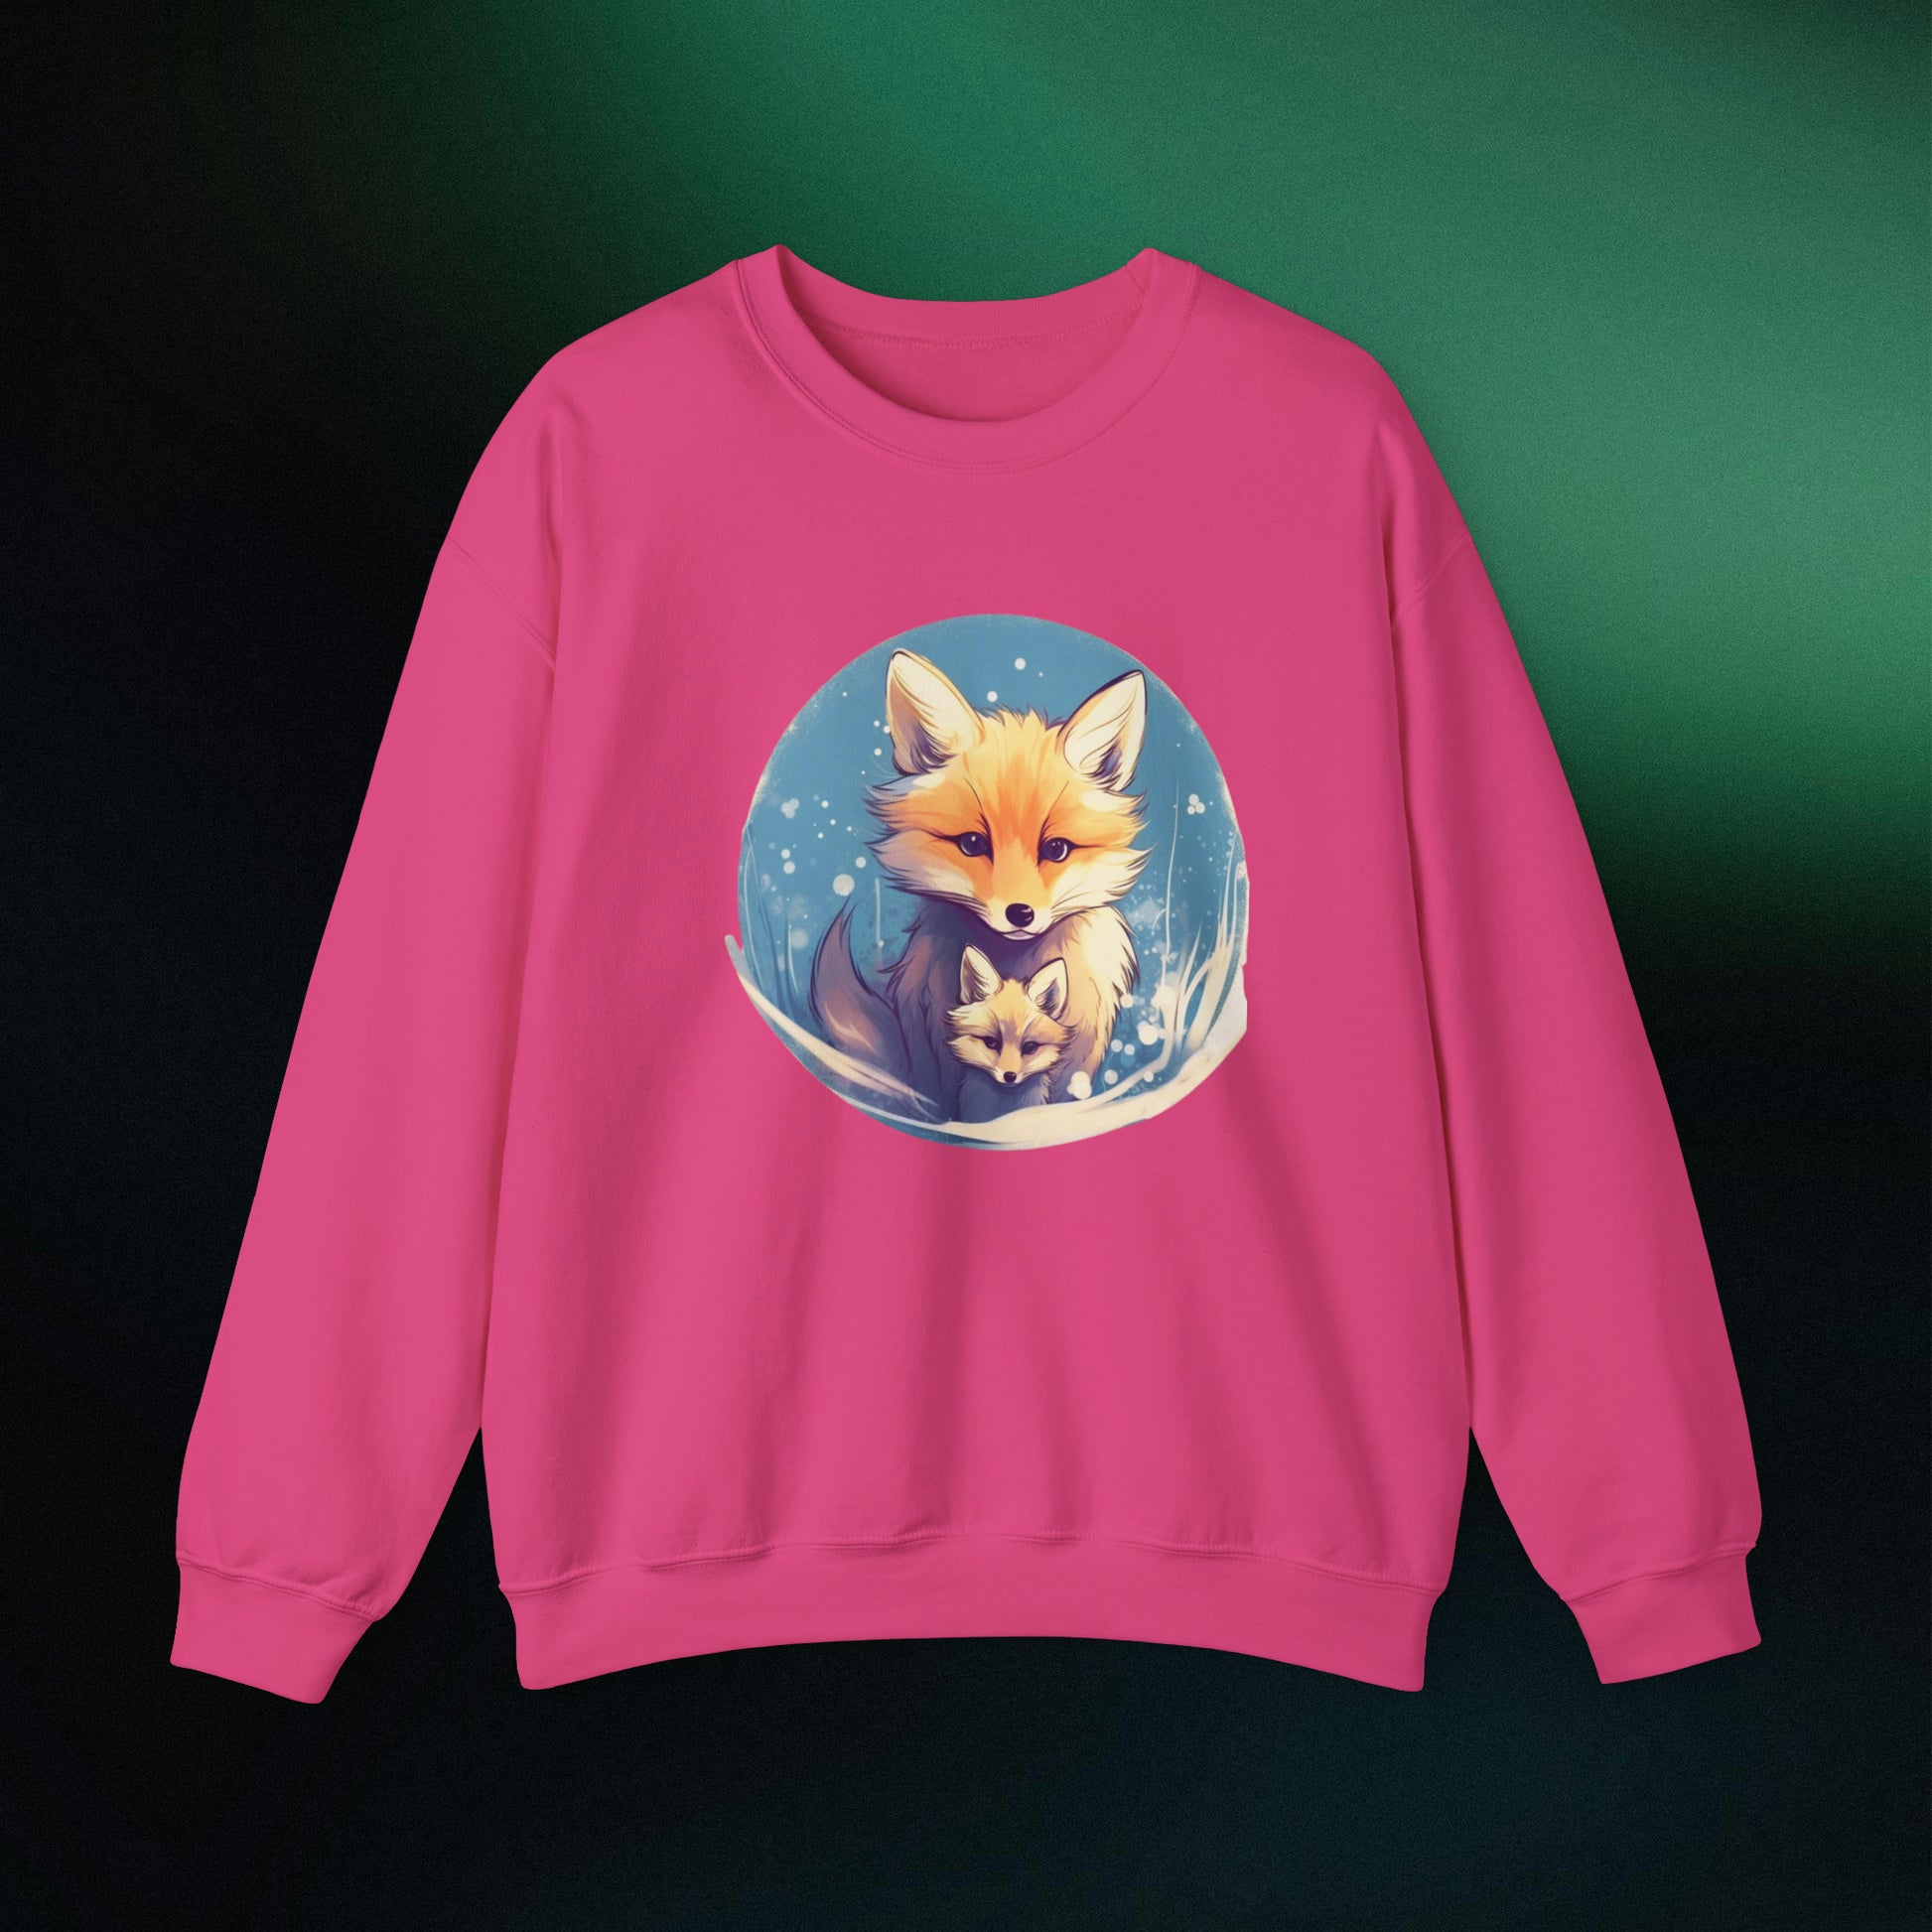 Vintage Forest Witch Aesthetic Sweatshirt - Cozy Fox Cottagecore Sweater with Mommy and Baby Fox Design Sweatshirt S Heliconia 